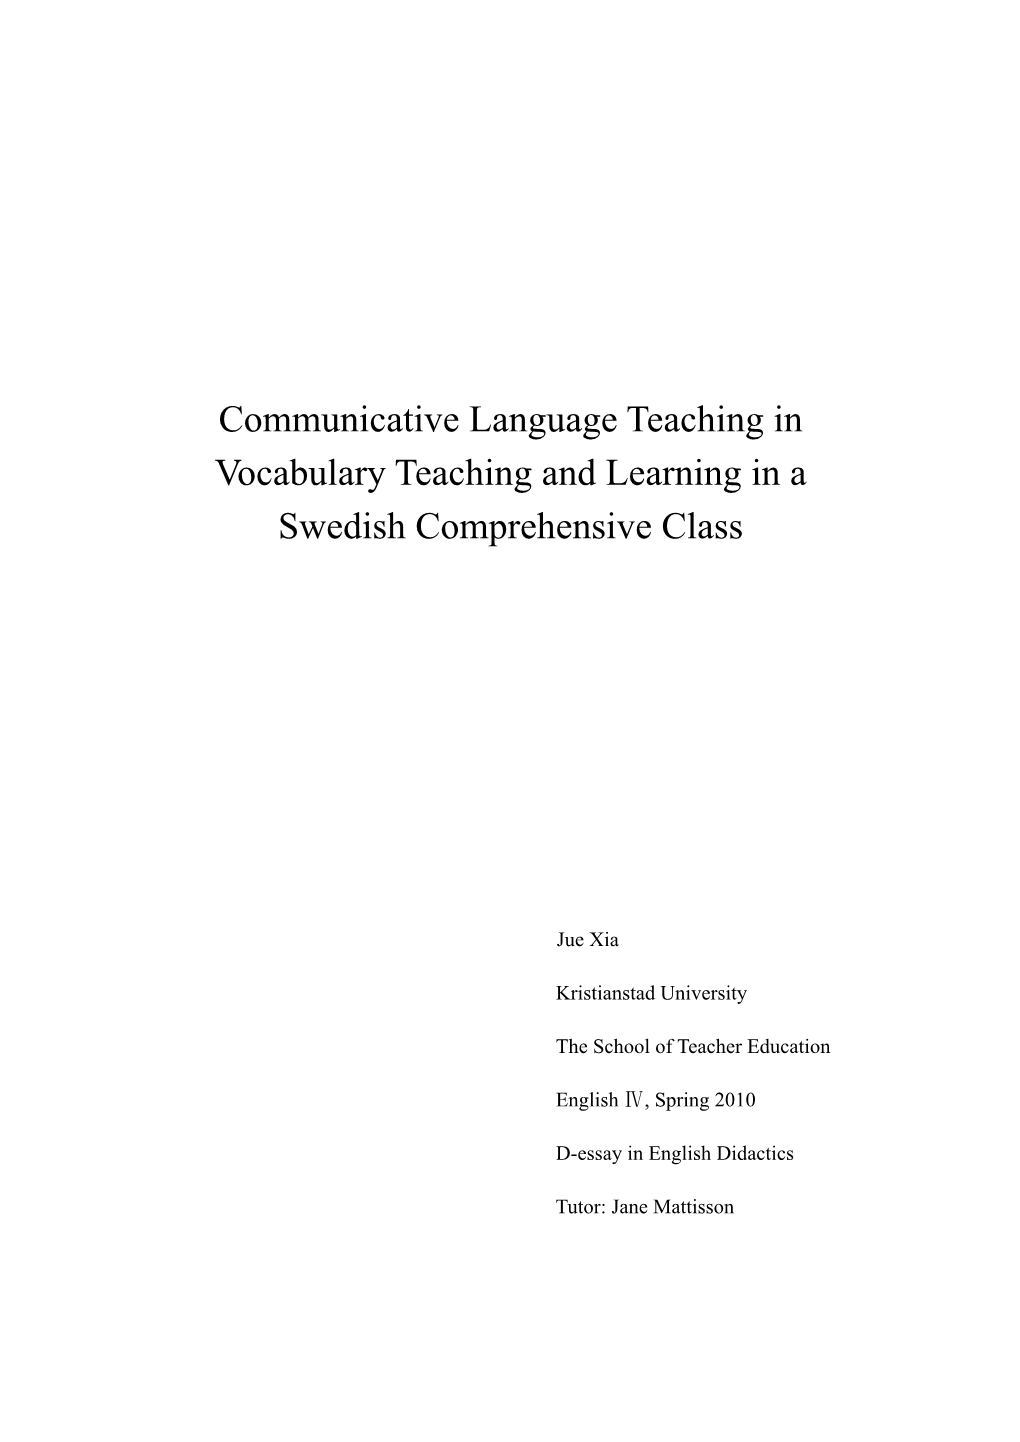 Communicative Language Teaching in Vocabulary Teaching and Learning in a Swedish Comprehensive Class